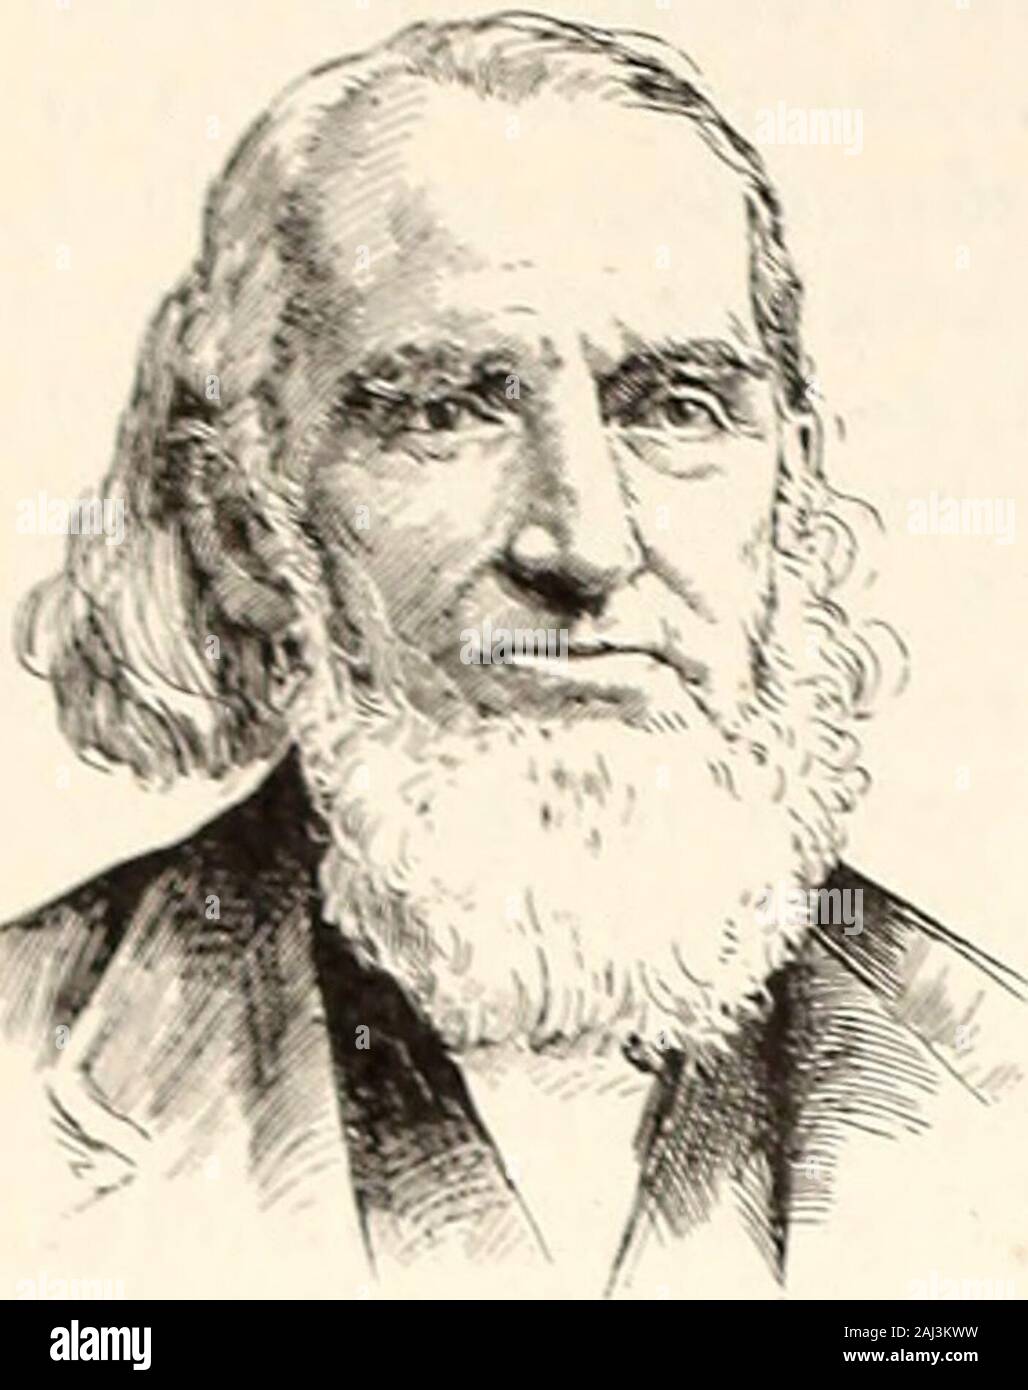 Appletons' cyclopædia of American biography . he Pennsylvania col-lege of dental surgery. He is the author of astandard work entitled Ether and Chloroform,their Employment in Surgery, Dentistry, Mid-wifery, etc. (Philadelphia, 1851). FLAGG, Wilson, naturalist, b. in Beverly.Mass., 5 Nov., 1805; d. in North Cambridge, Mass..6 May, 1884. He was educated at Phillips Ando-ver academy, and entered Harvard in 1823. butremained there only three months, leaving to de-vote himself to the study of medicine: he. how-ever, never practised. In early manhood he madea pedestrian tour alone from Tennessee to Stock Photo